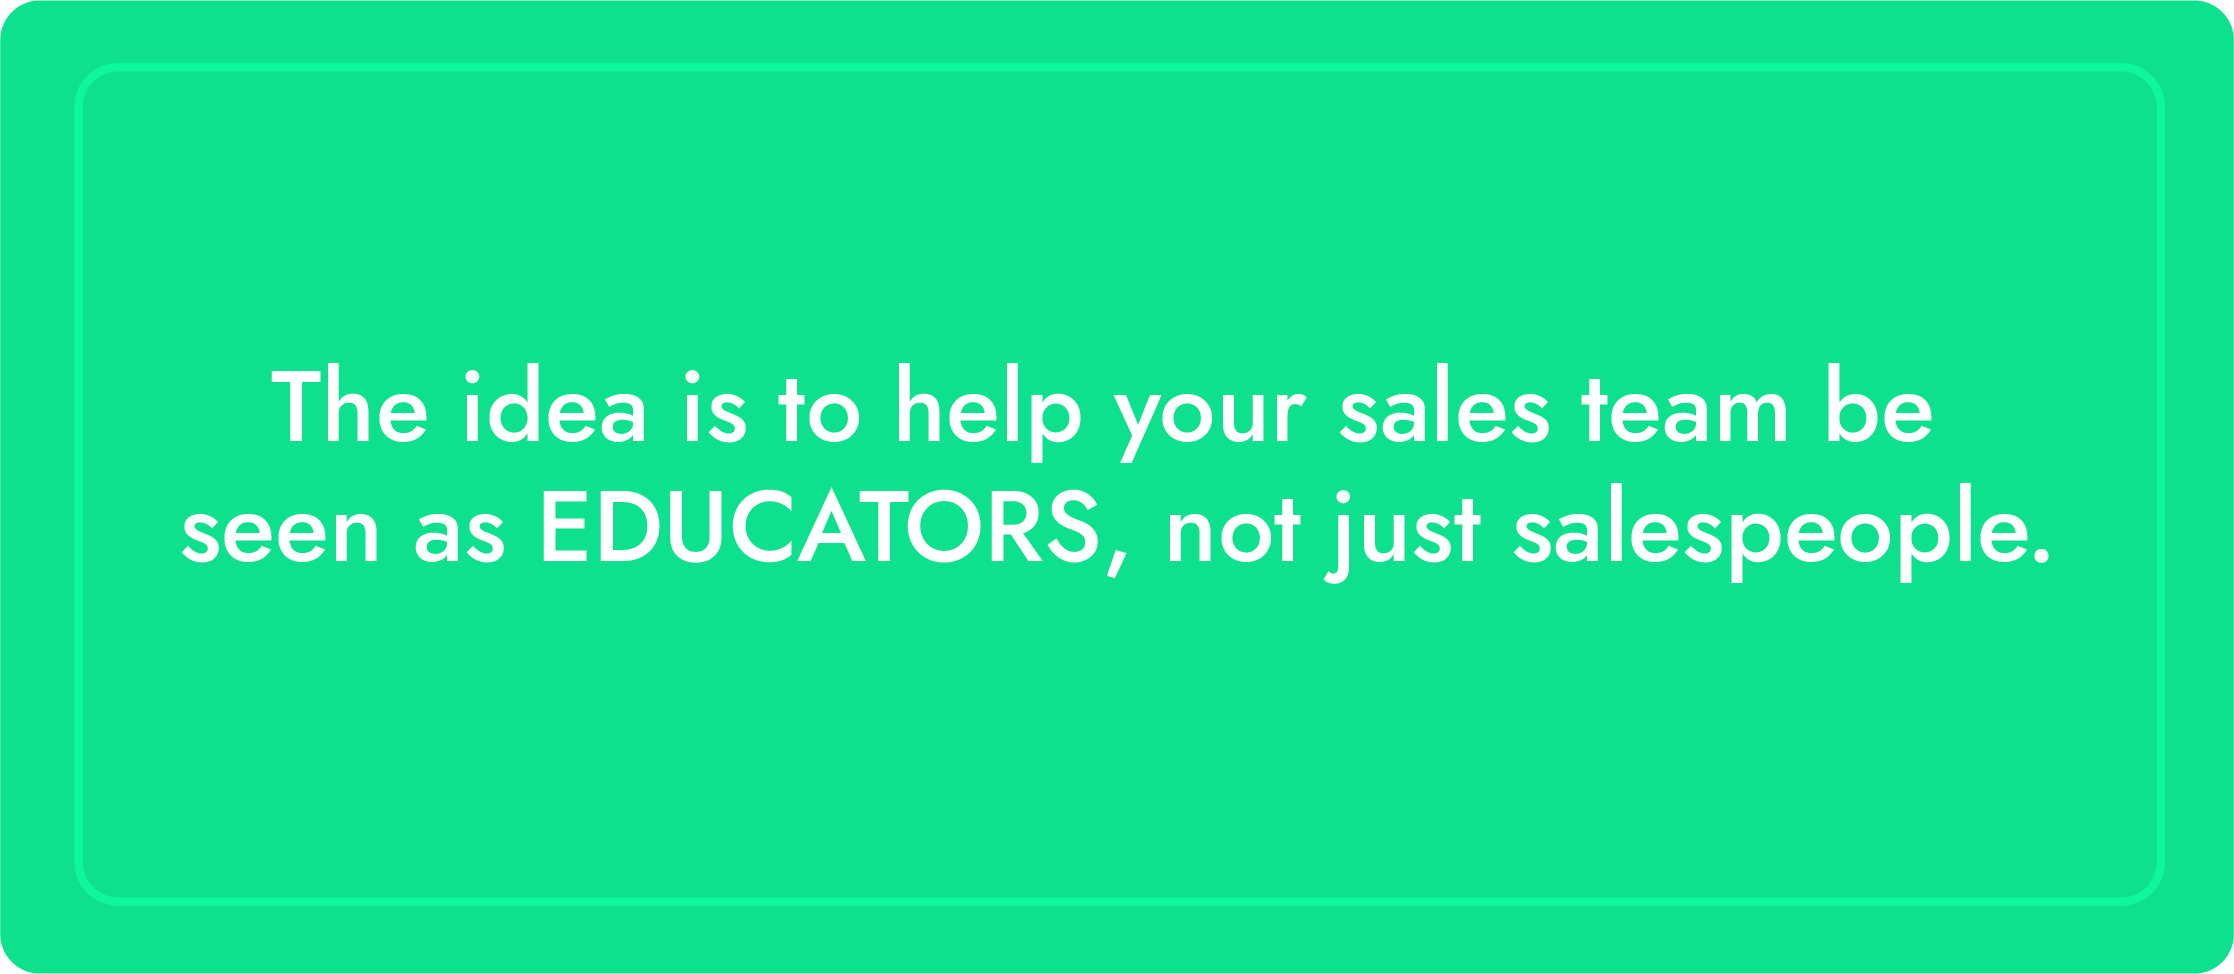 The idea is to help your sales team be seen as educators, not just salespeople.